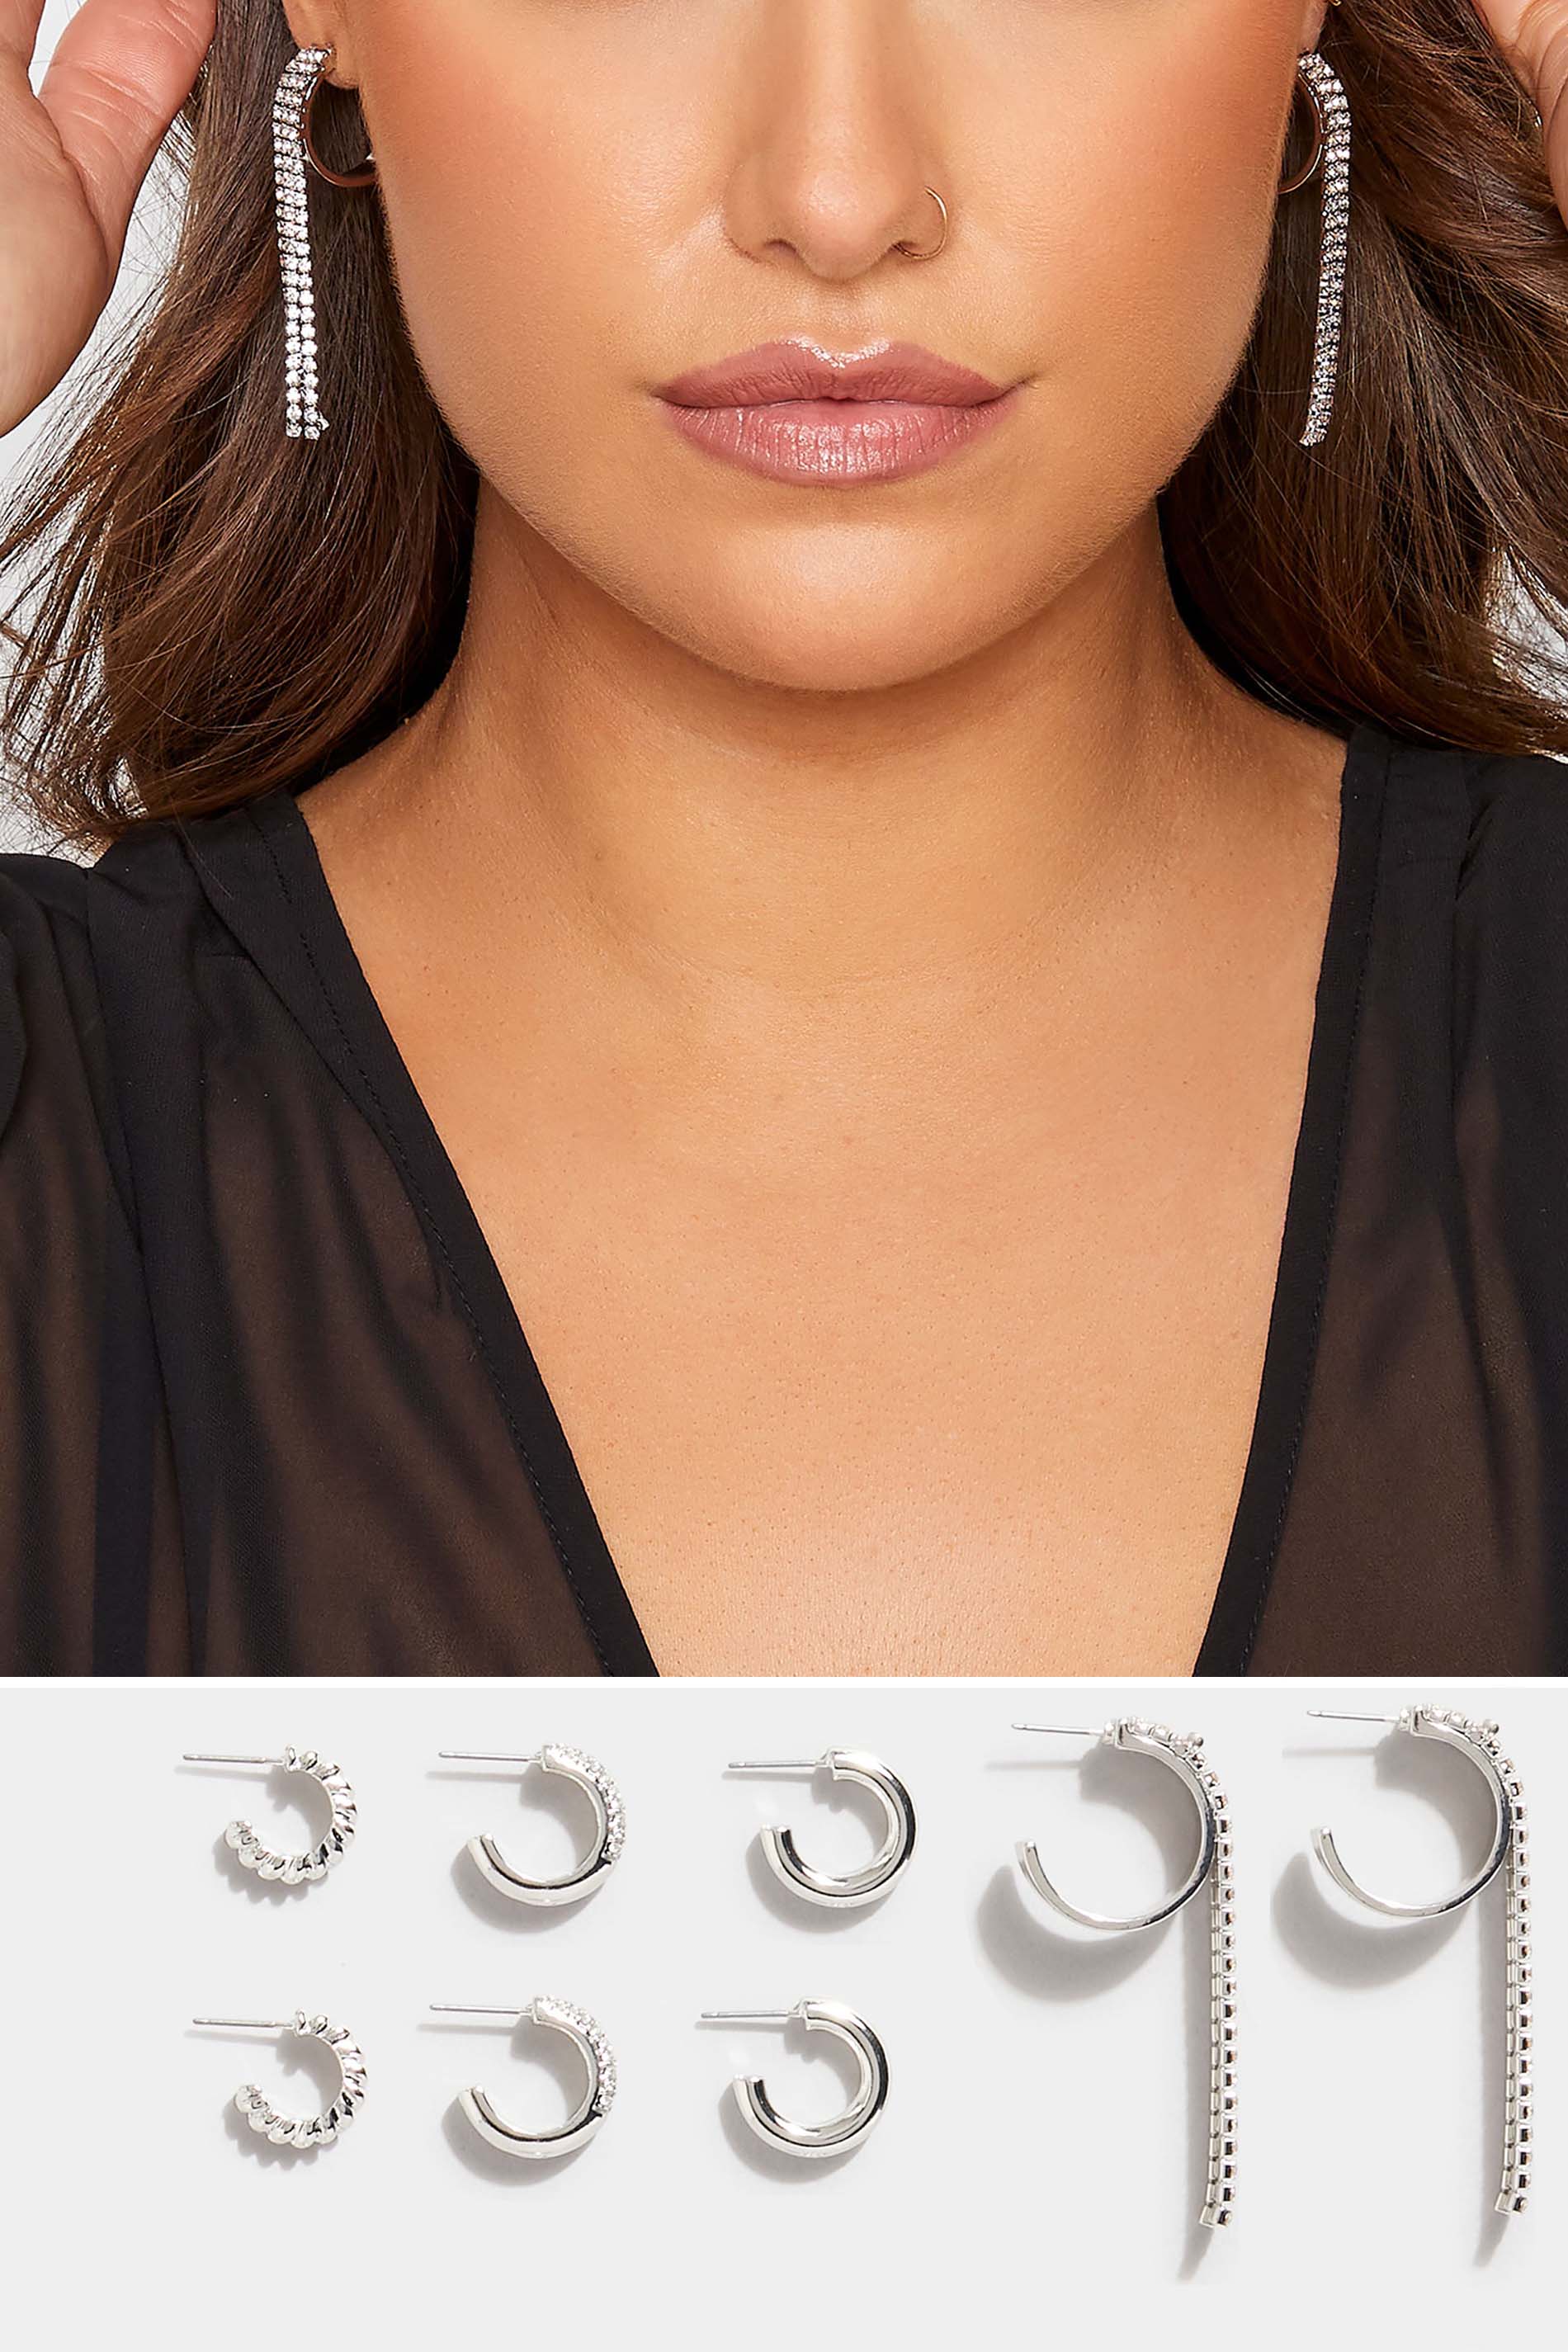 4 PACK Silver Tone Assorted Diamante Hoop Earrings | Yours Clothing 1